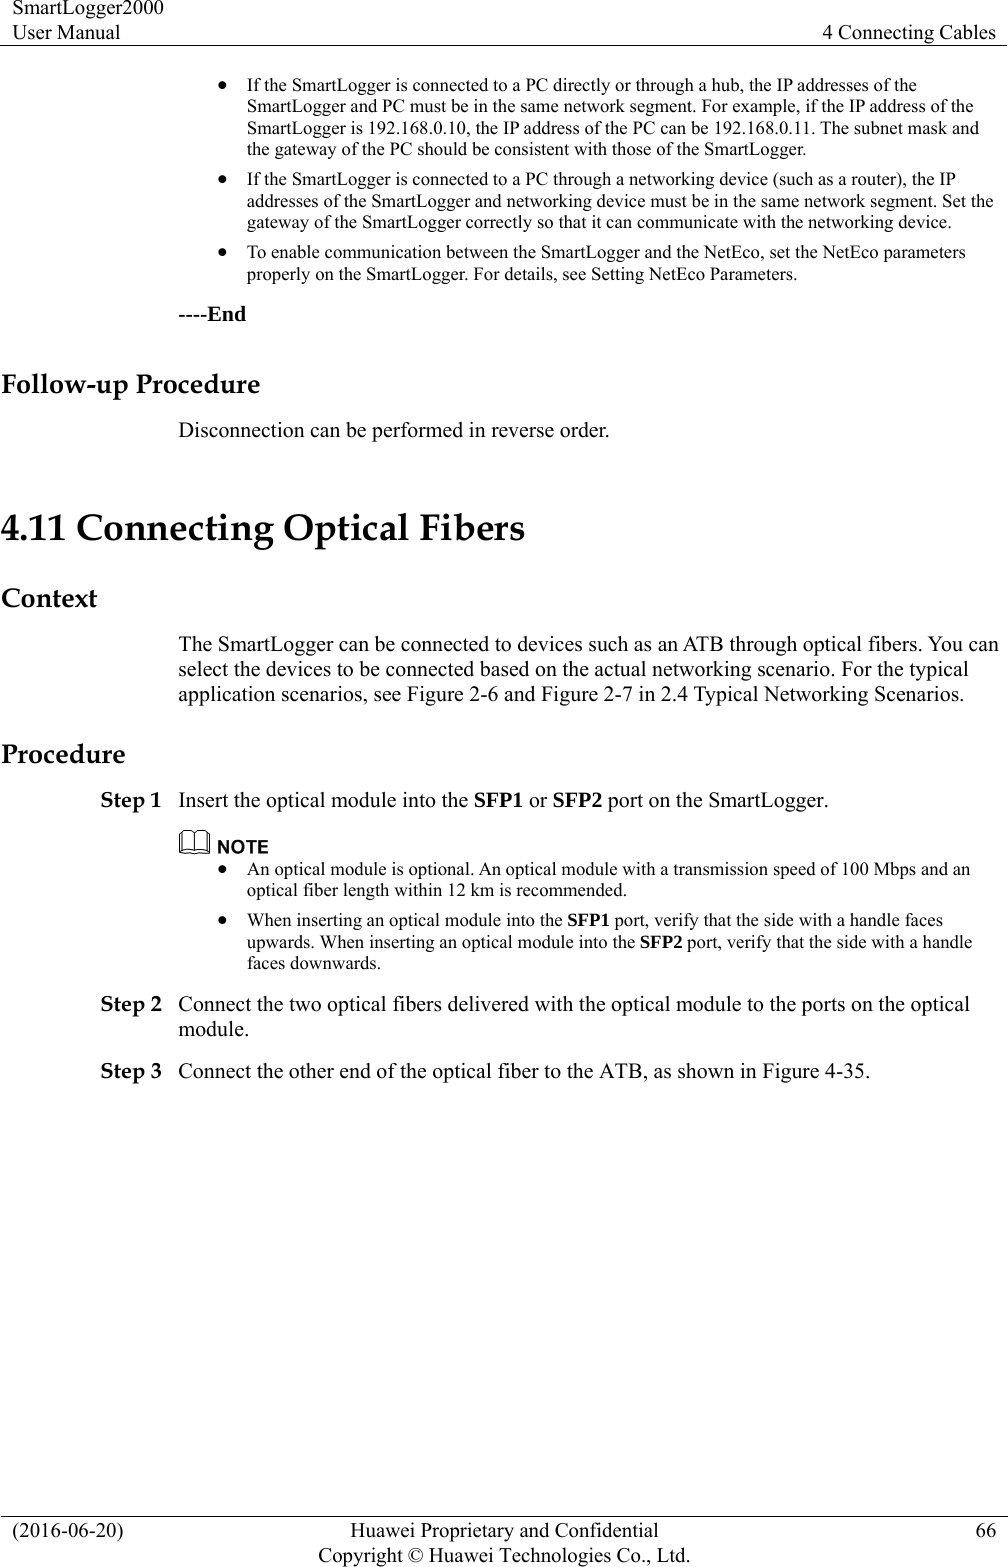 SmartLogger2000 User Manual  4 Connecting Cables (2016-06-20)  Huawei Proprietary and Confidential         Copyright © Huawei Technologies Co., Ltd.66  If the SmartLogger is connected to a PC directly or through a hub, the IP addresses of the SmartLogger and PC must be in the same network segment. For example, if the IP address of the SmartLogger is 192.168.0.10, the IP address of the PC can be 192.168.0.11. The subnet mask and the gateway of the PC should be consistent with those of the SmartLogger.  If the SmartLogger is connected to a PC through a networking device (such as a router), the IP addresses of the SmartLogger and networking device must be in the same network segment. Set the gateway of the SmartLogger correctly so that it can communicate with the networking device.    To enable communication between the SmartLogger and the NetEco, set the NetEco parameters properly on the SmartLogger. For details, see Setting NetEco Parameters. ----End Follow-up Procedure Disconnection can be performed in reverse order. 4.11 Connecting Optical Fibers Context The SmartLogger can be connected to devices such as an ATB through optical fibers. You can select the devices to be connected based on the actual networking scenario. For the typical application scenarios, see Figure 2-6 and Figure 2-7 in 2.4 Typical Networking Scenarios.   Procedure Step 1 Insert the optical module into the SFP1 or SFP2 port on the SmartLogger.     An optical module is optional. An optical module with a transmission speed of 100 Mbps and an optical fiber length within 12 km is recommended.    When inserting an optical module into the SFP1 port, verify that the side with a handle faces upwards. When inserting an optical module into the SFP2 port, verify that the side with a handle faces downwards.   Step 2 Connect the two optical fibers delivered with the optical module to the ports on the optical module.  Step 3 Connect the other end of the optical fiber to the ATB, as shown in Figure 4-35. 